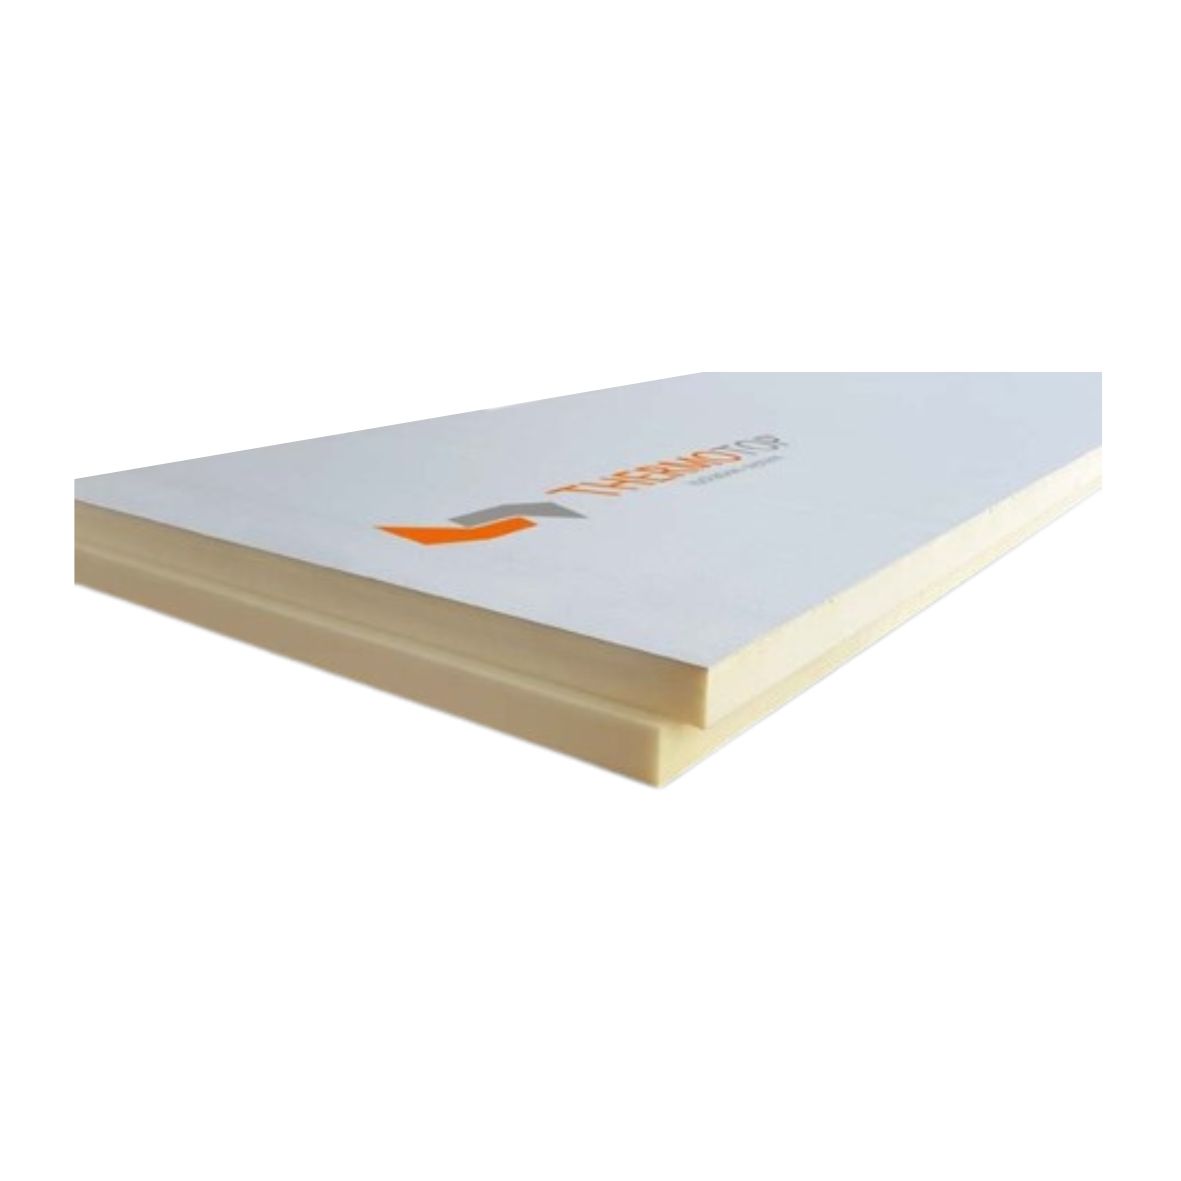 PIR Thermal insulation boards - Thermotop Toboard PIR BV-BV thermal insulation board 60 x 1200 x 2400 mm, https:maxbau.ro